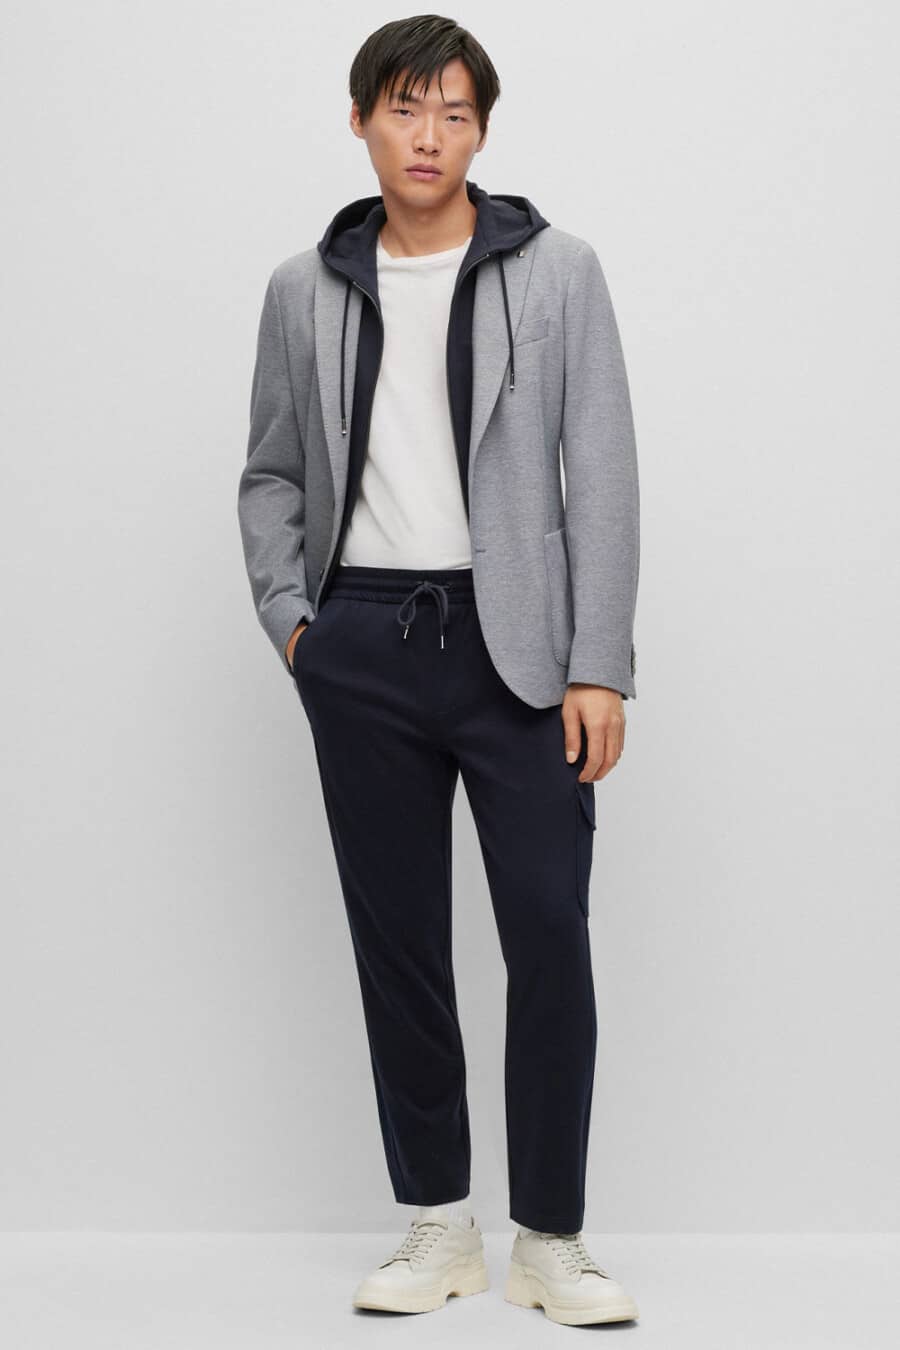 Men's navy drawstring pants, white T-shirt, navy technical hoodie, grey blazer and off-white sneakers outfit